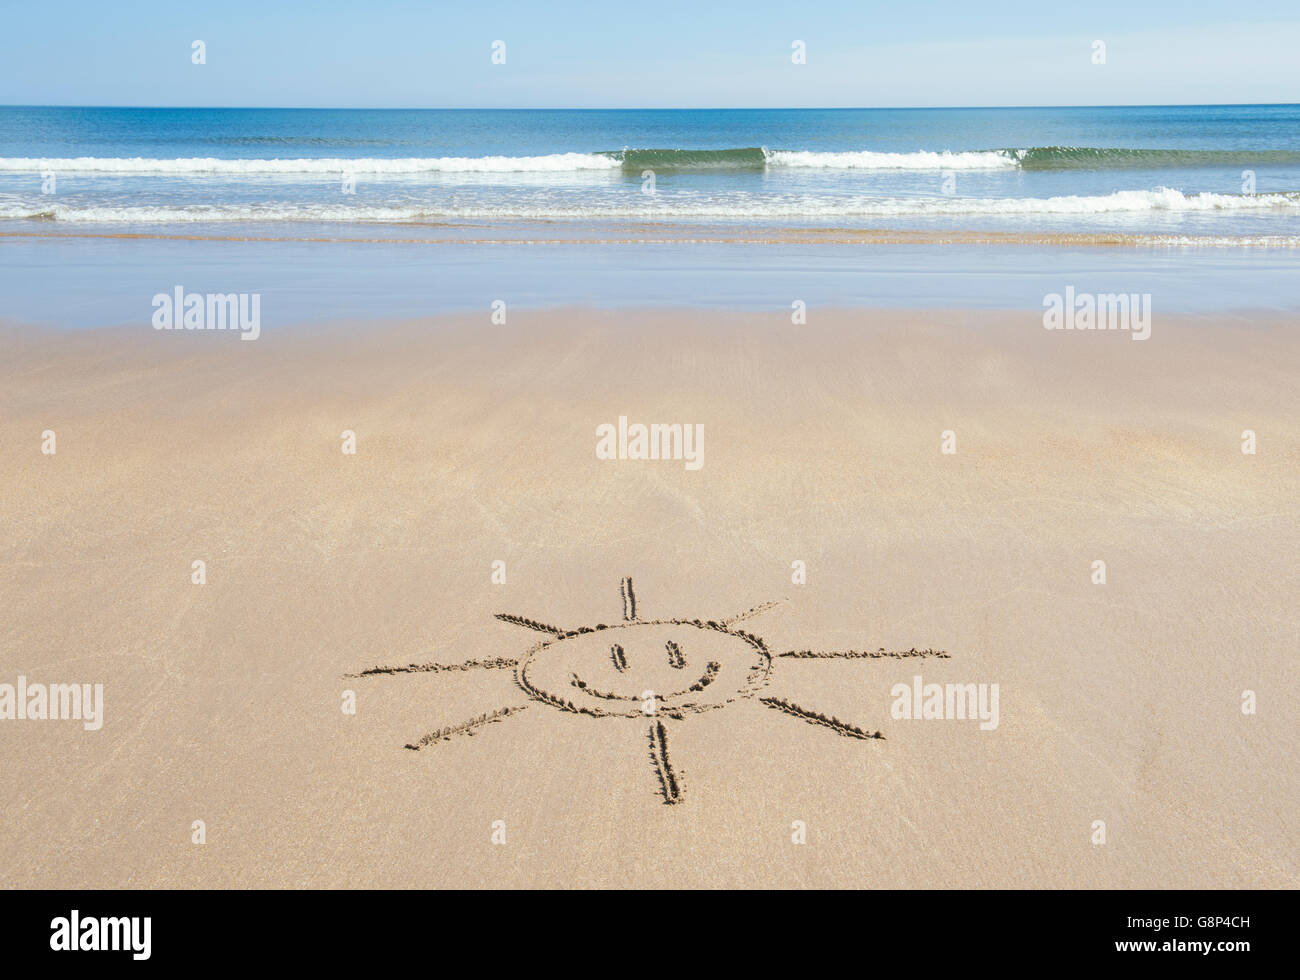 Smiley face sun drawing on a beach. UK Stock Photo